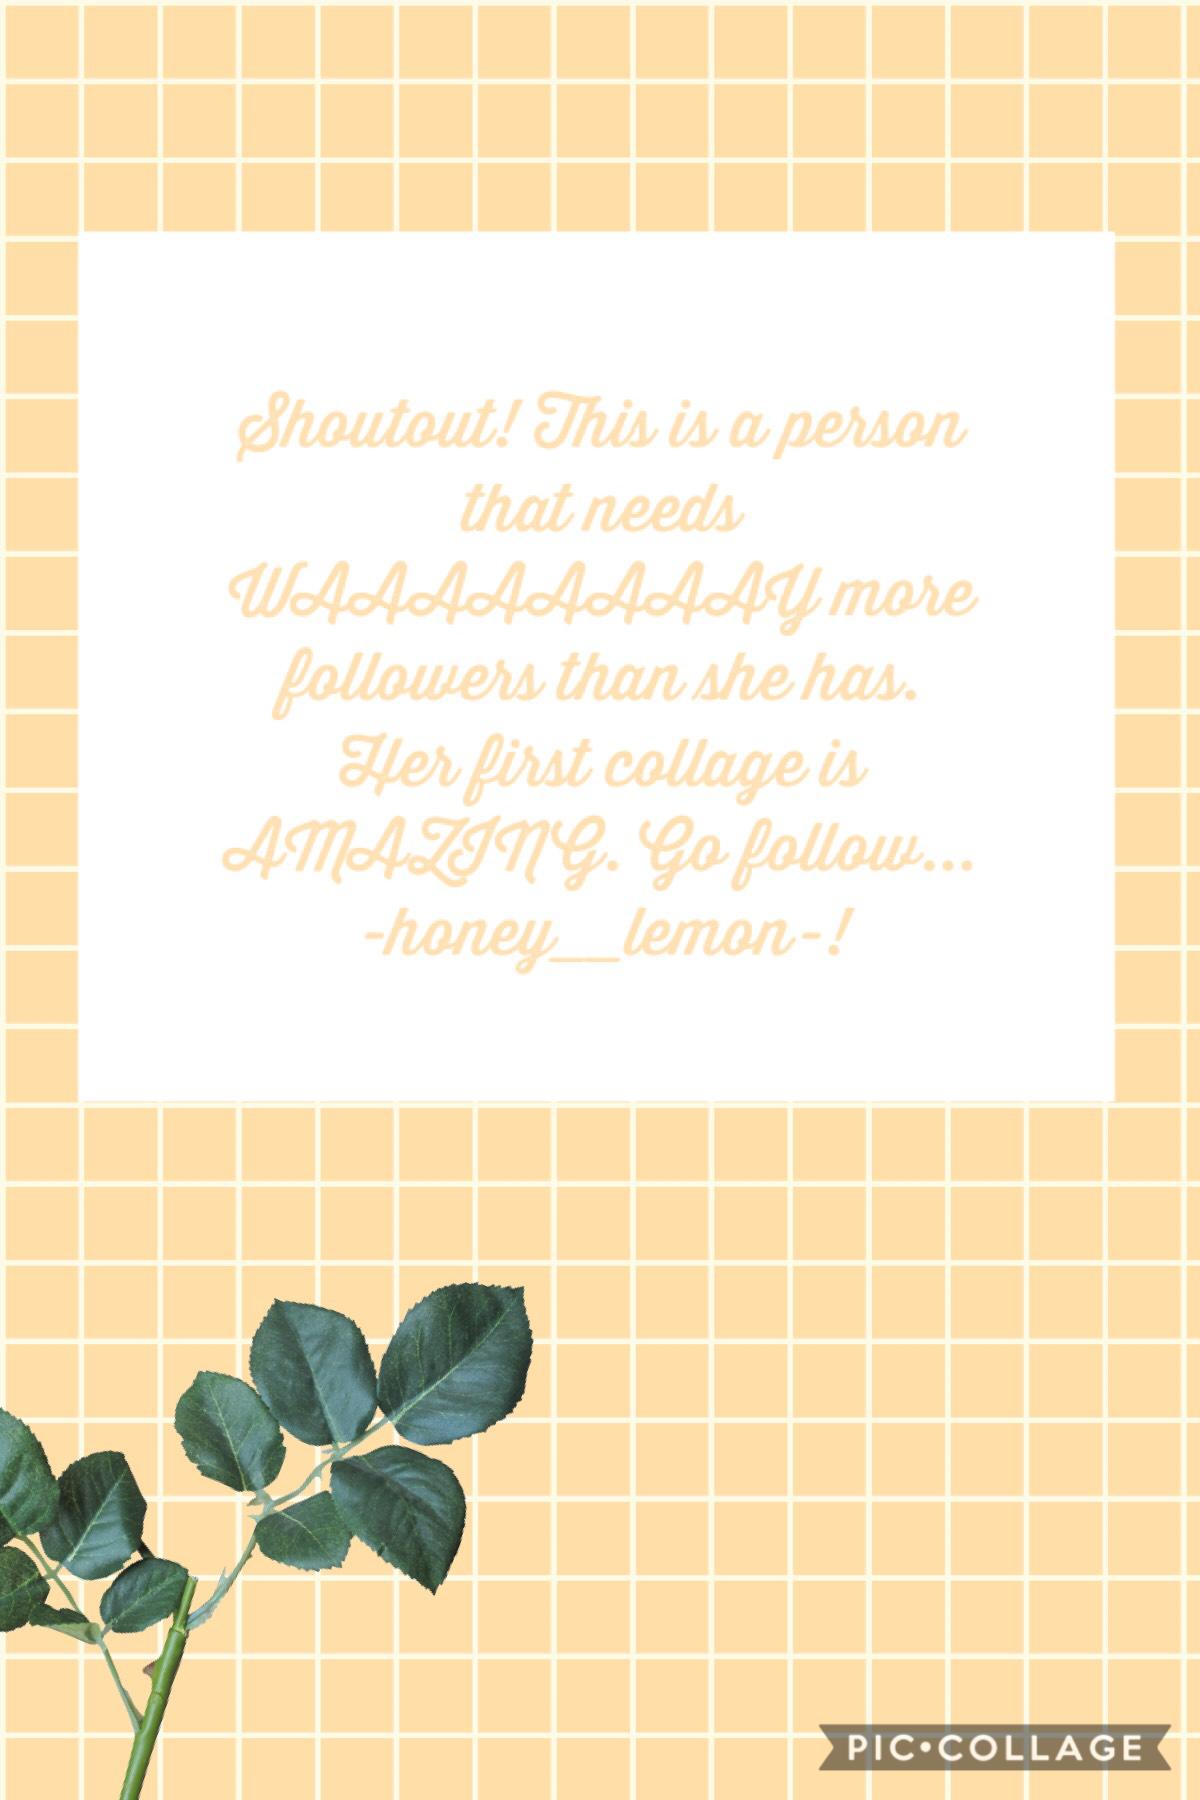 🌿Tap🌿
Hello lovelies! I know, I know, I haven’t been posting. I went on a vacation! I didn’t have access to my phone all day, so... ya know... I could not post. -honey__lemon-, if you see this, I am excited to get to know you! Love y’all!